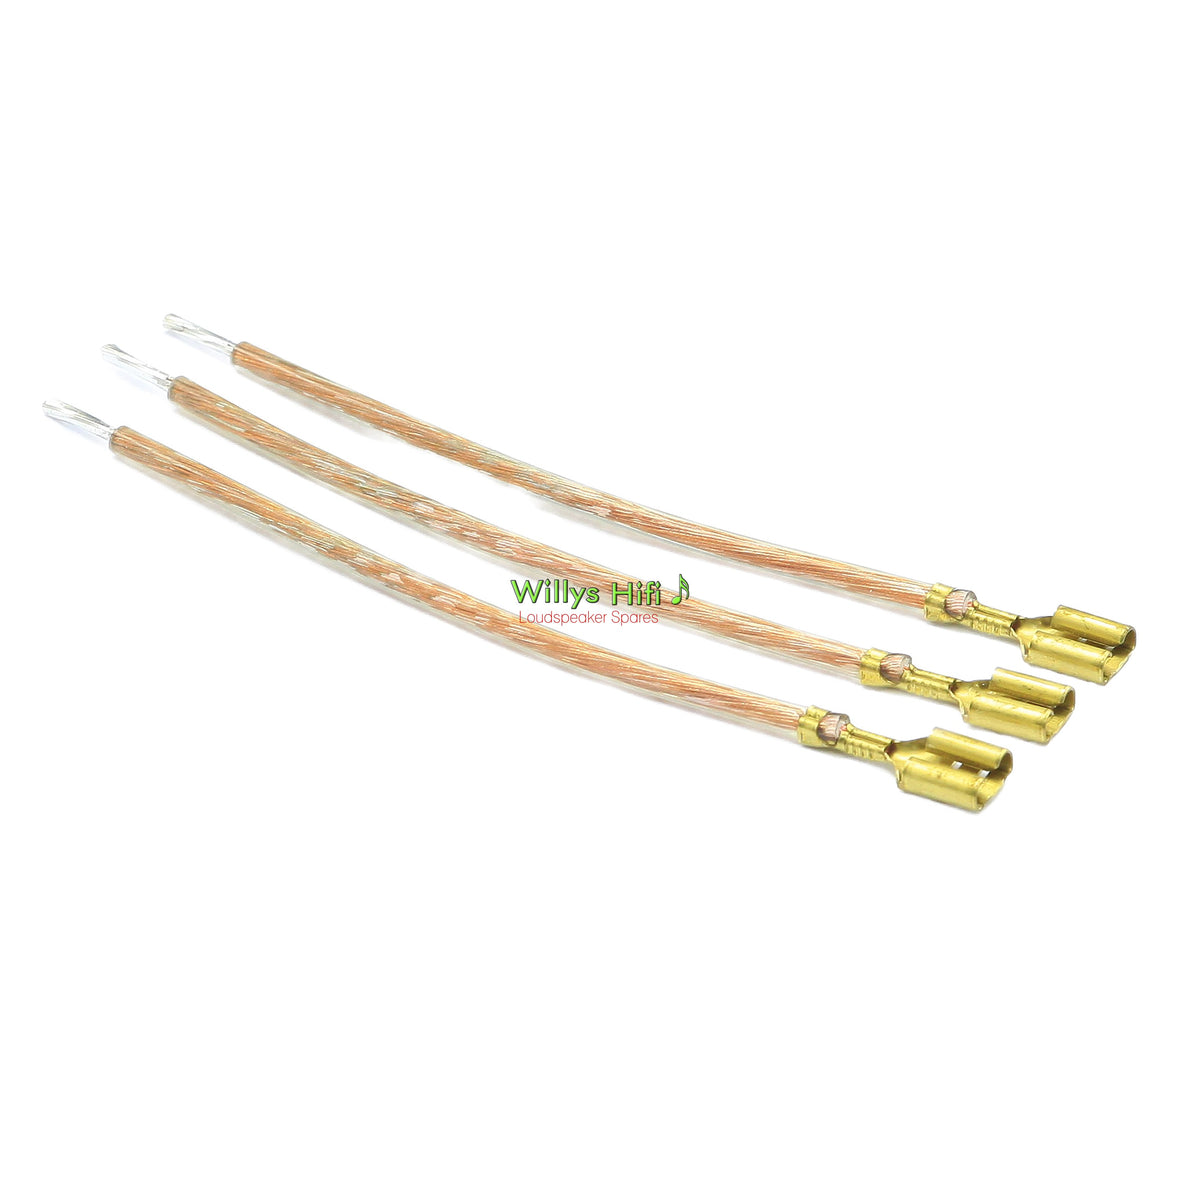 Intertechnik High Pass Crossover PCB 1500638 fly leads